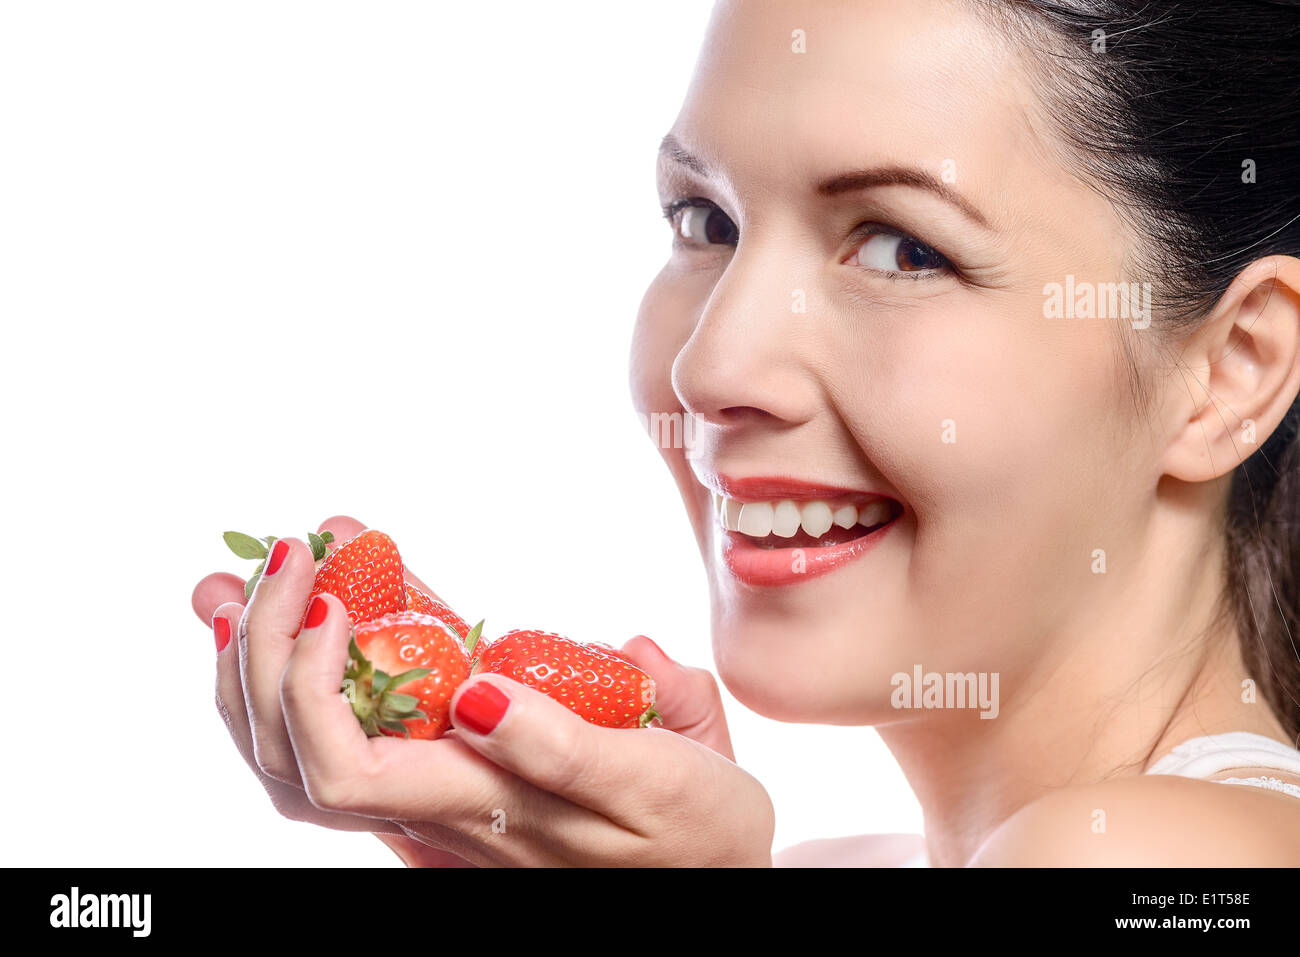 Smiling Woman with Strawberries in her Hand Stock Photo